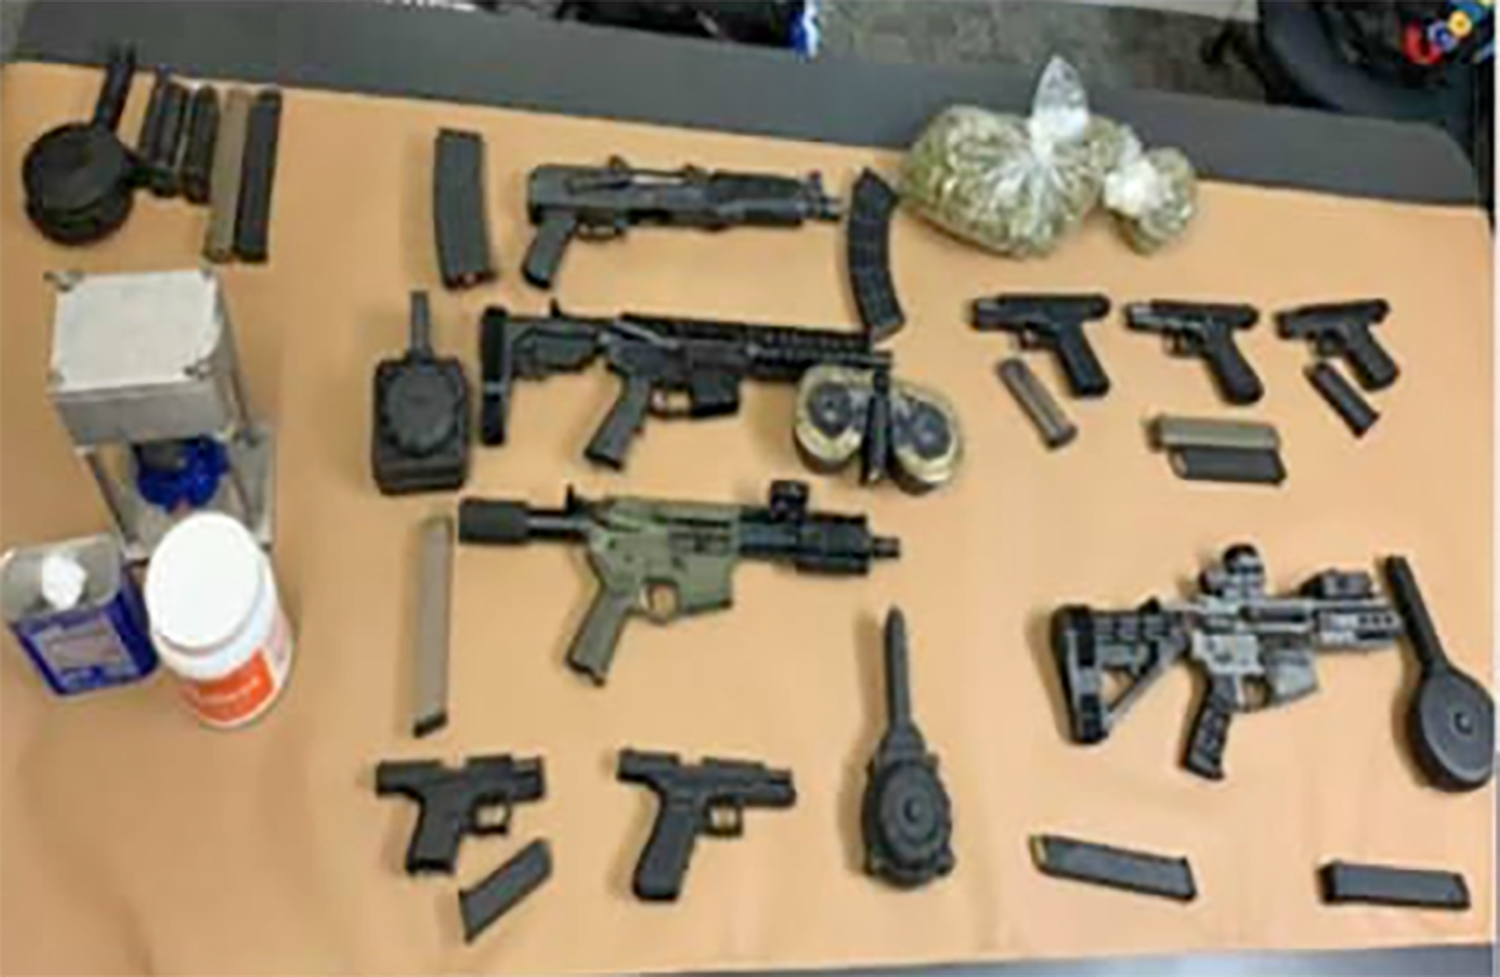 Firearms, Drugs Seized After Multi-Agency Investigation